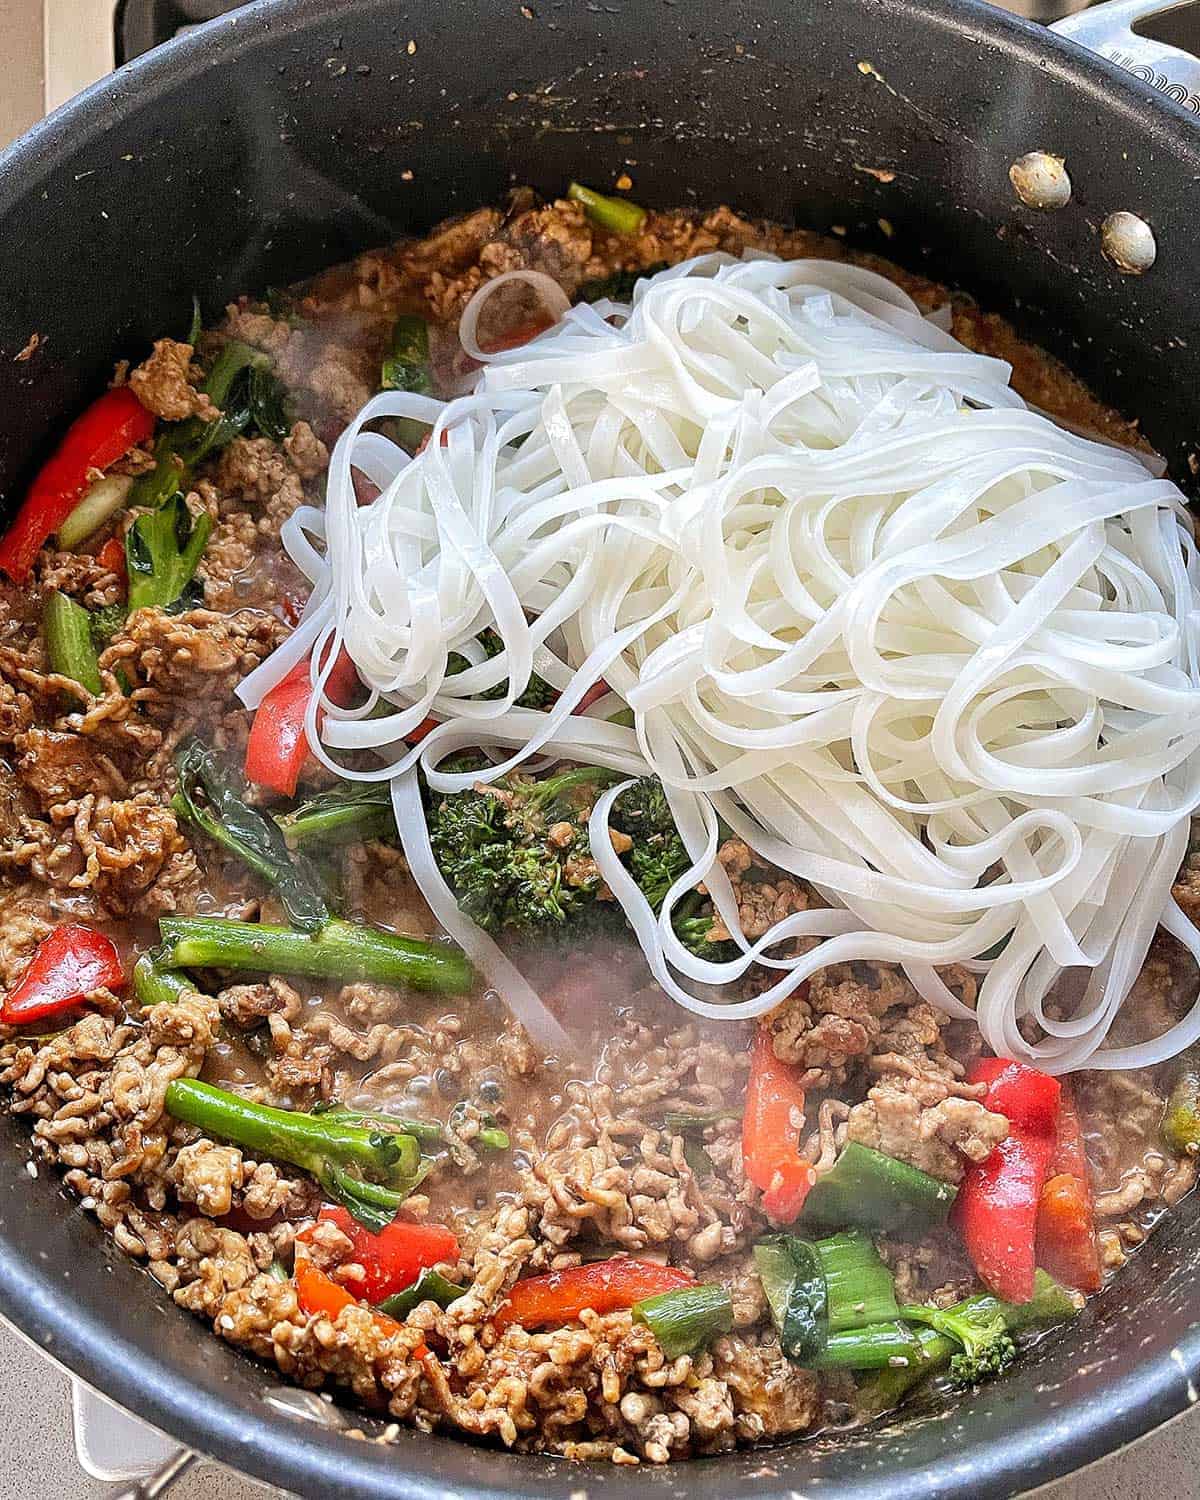 Noodles and pork mince cooking in a large frying pan.